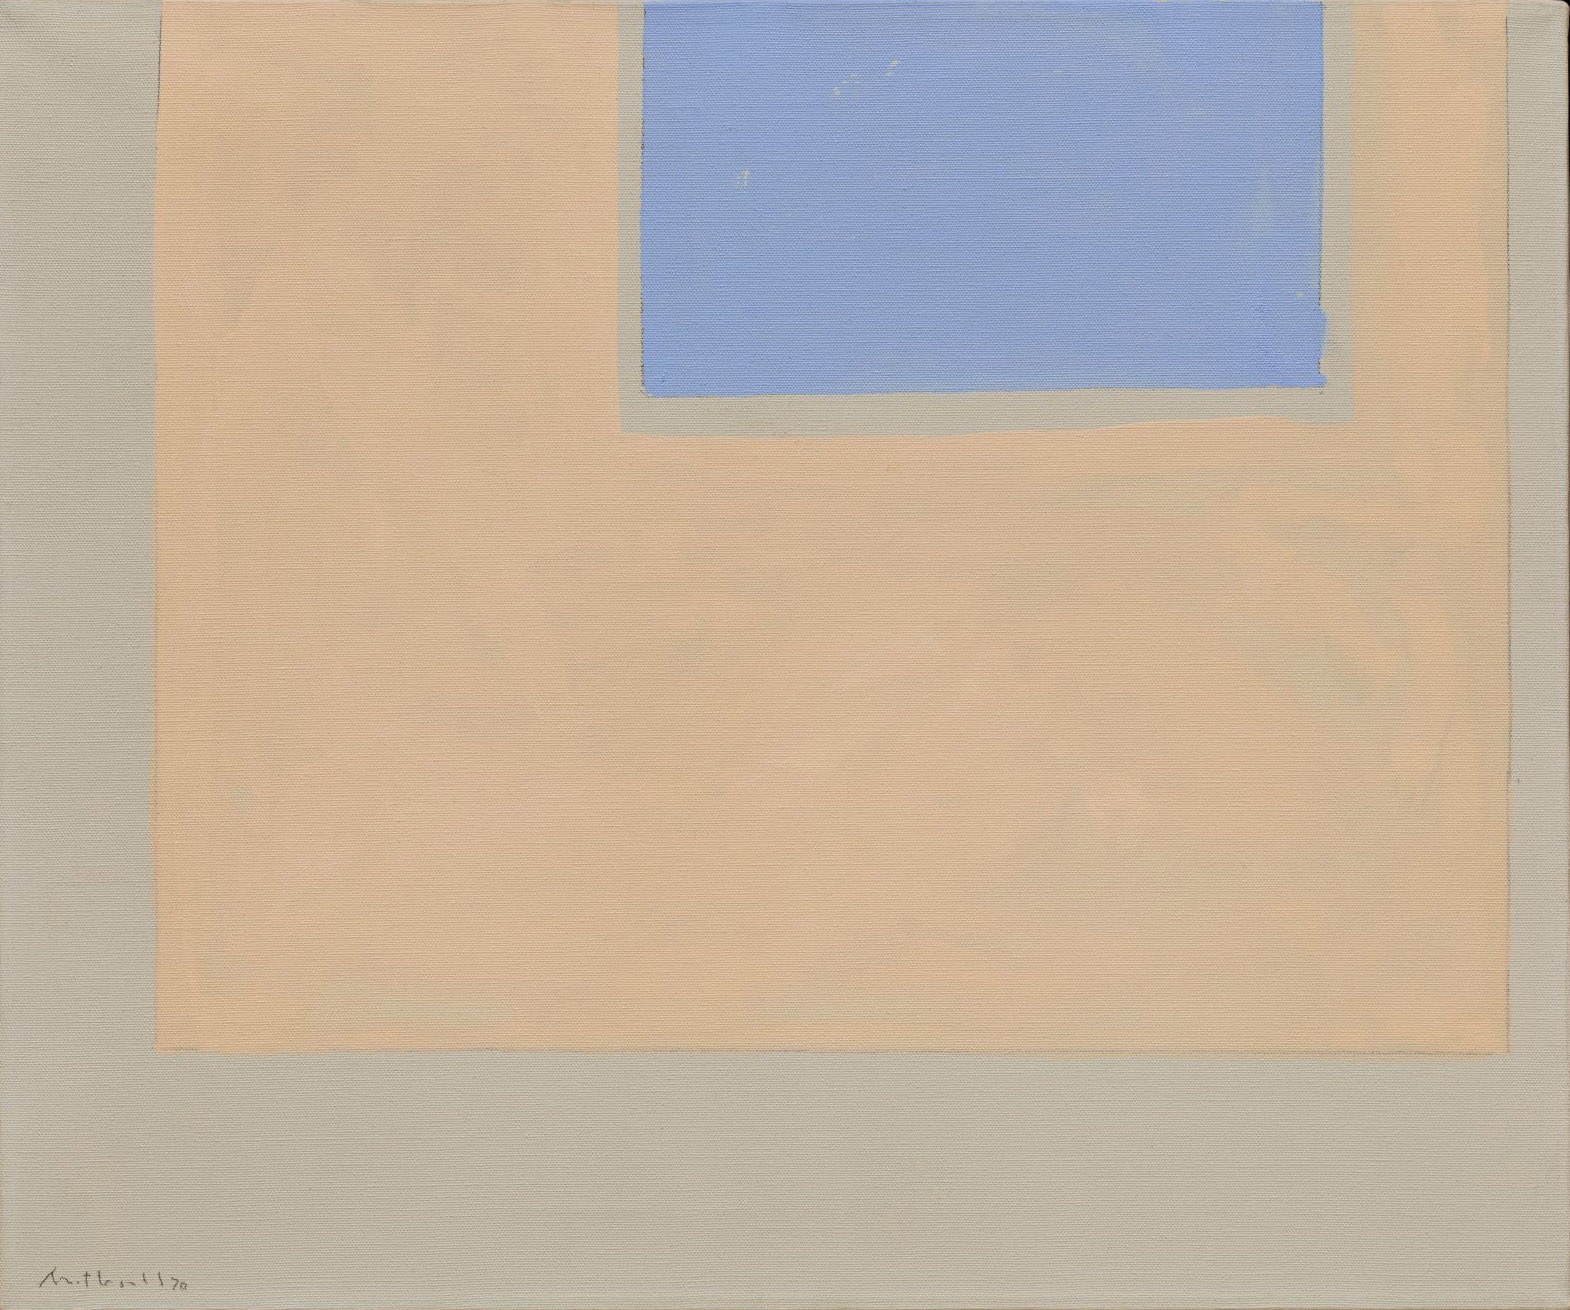 Open No. 132: Blue and Beige, 1970